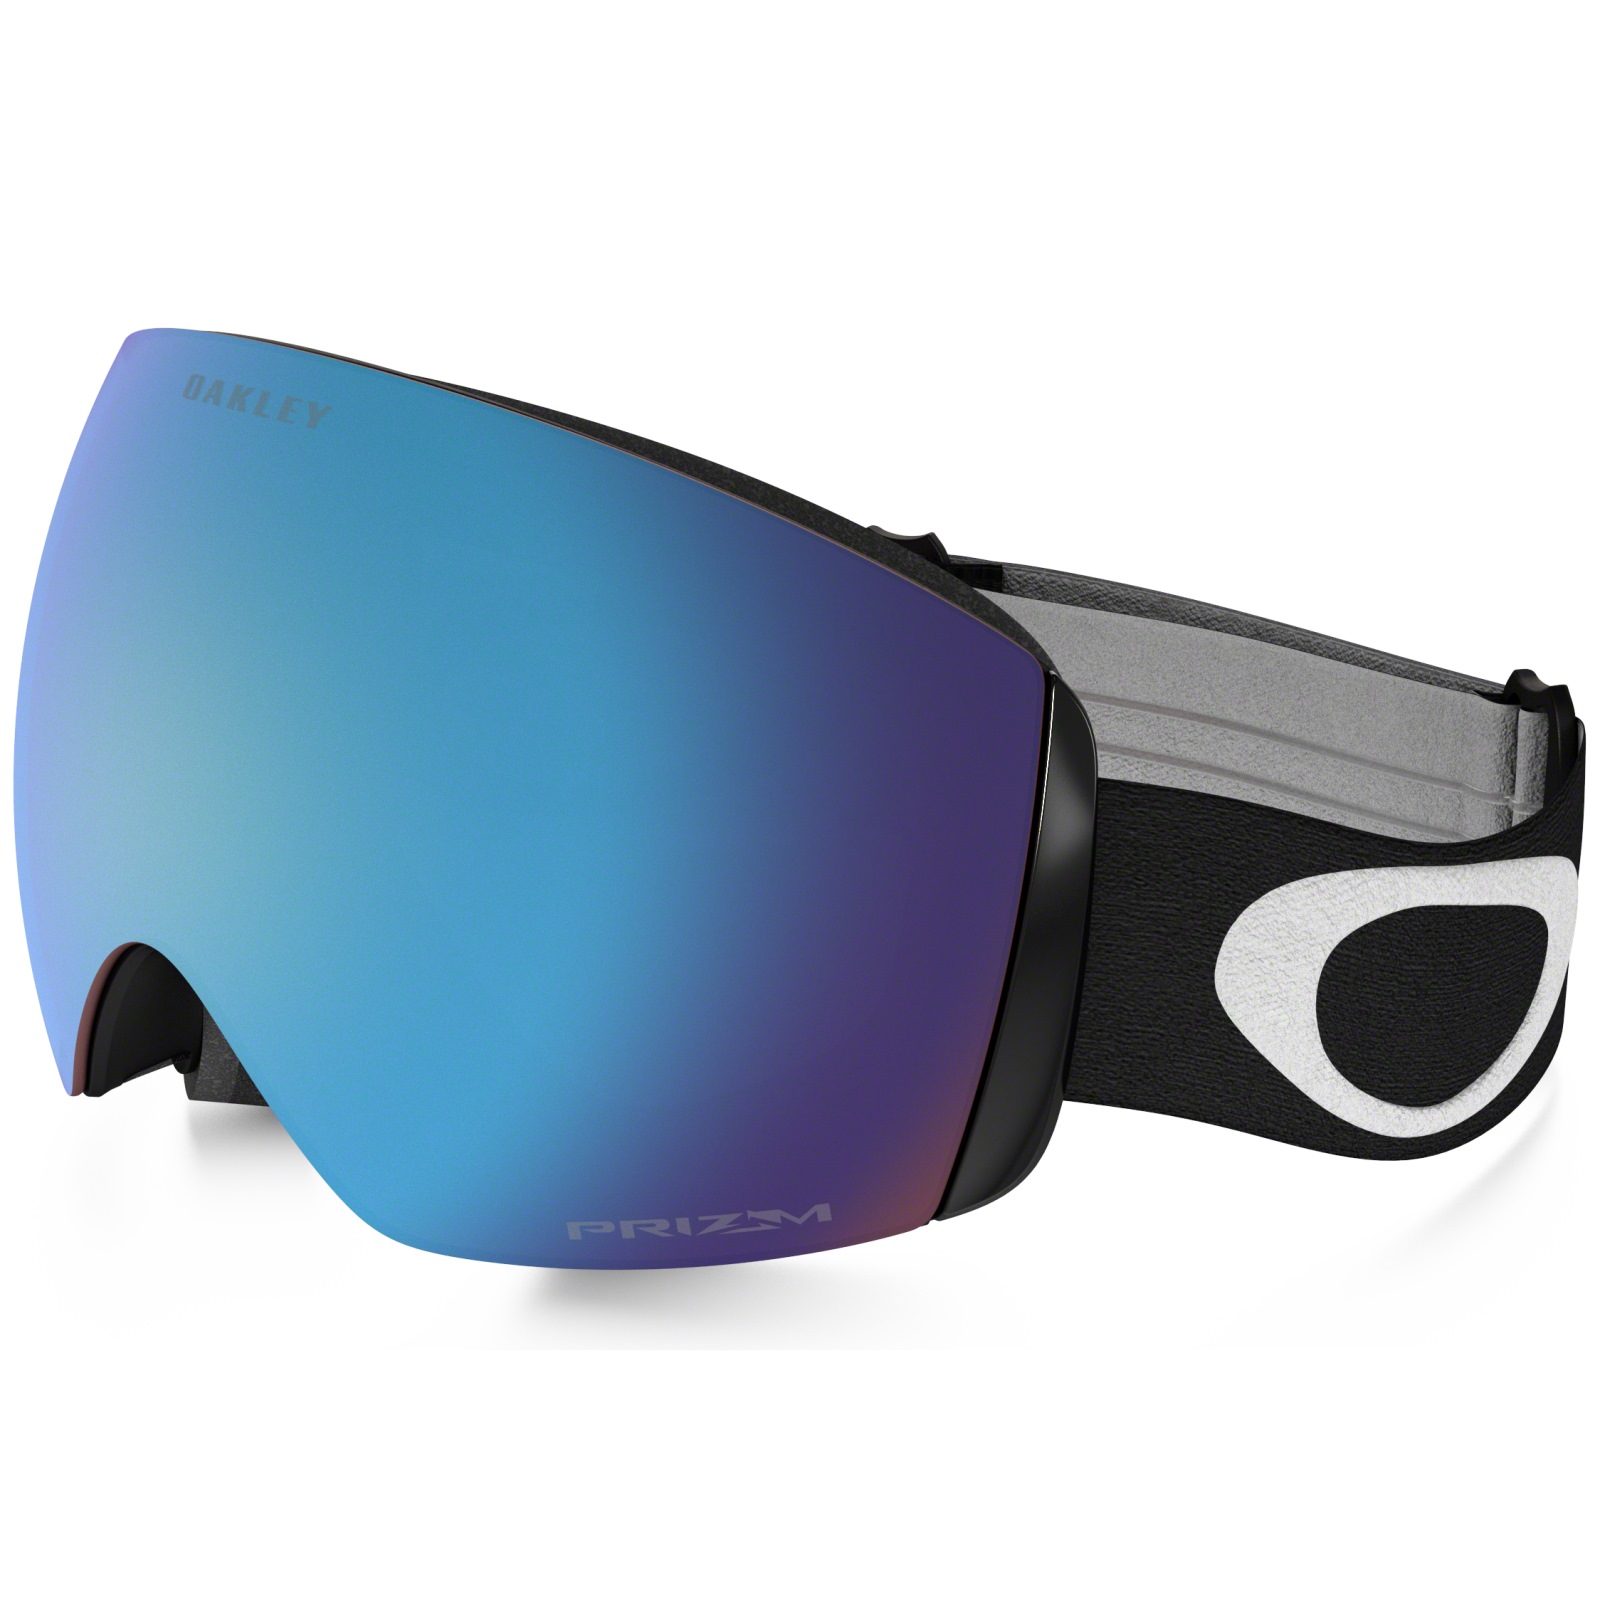 Buy Oakley Flight Deck Xm from Outnorth